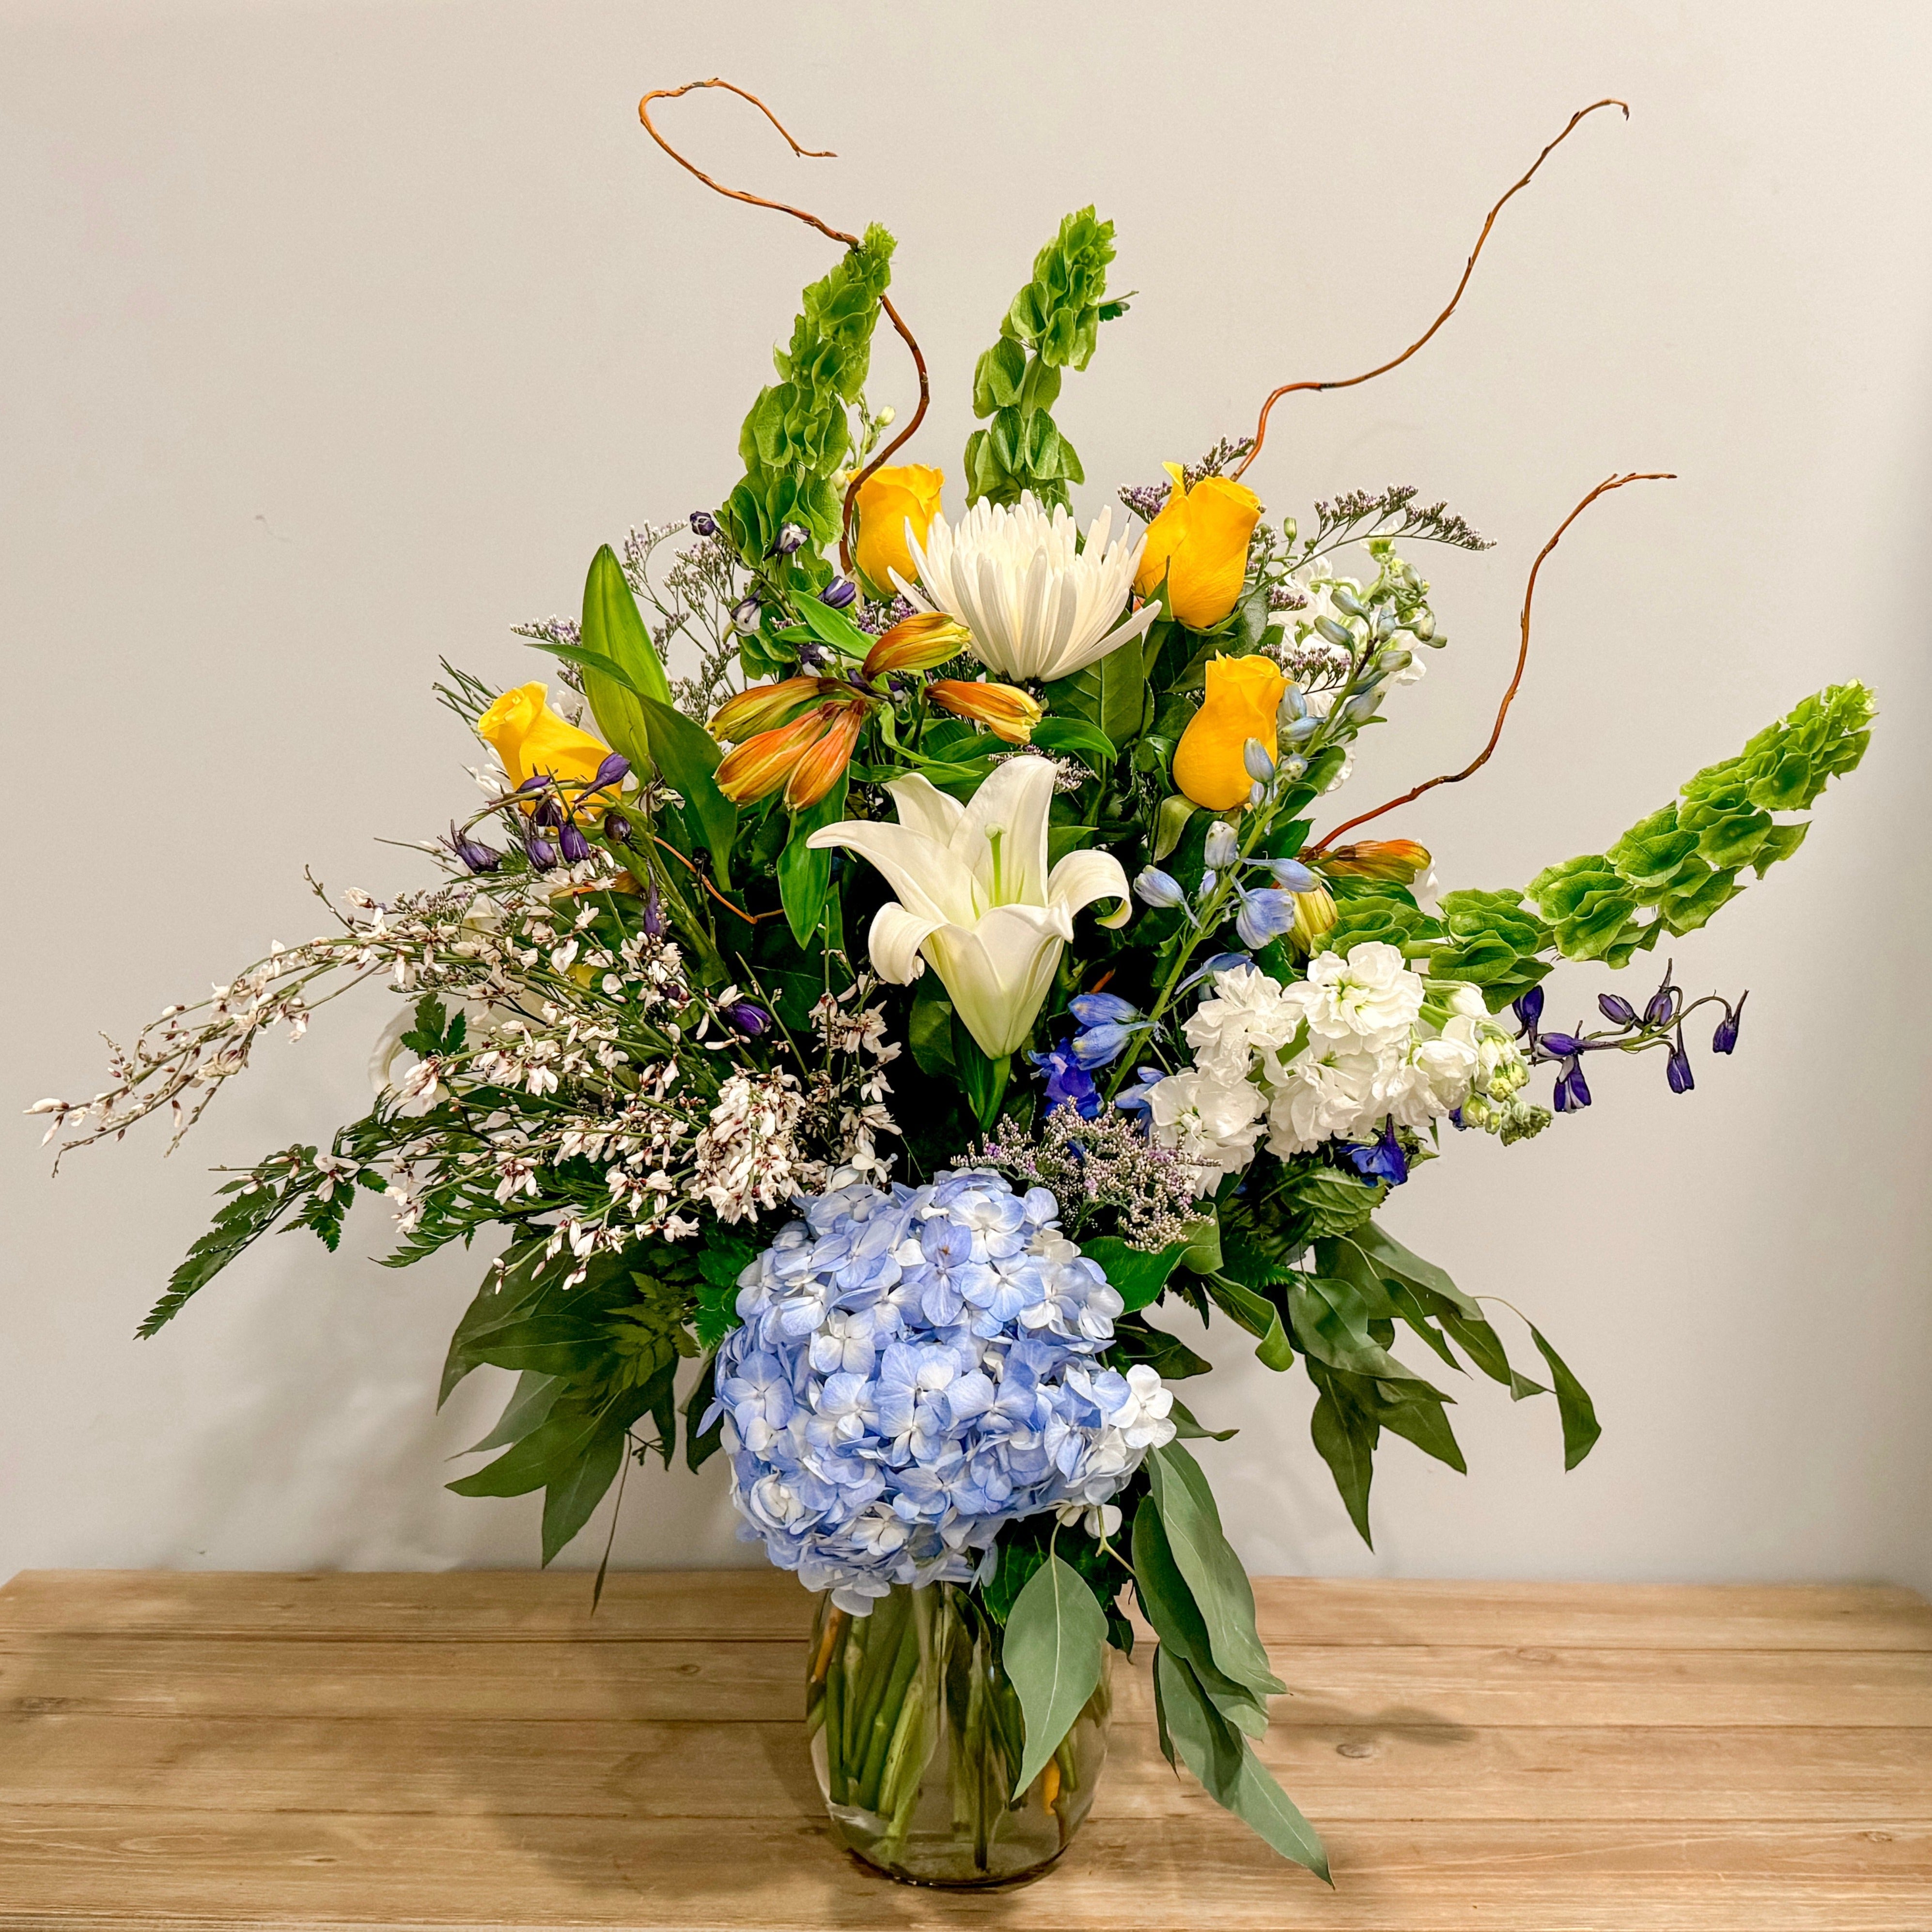 A vase arrangement with yellow roses, bells of Ireland, blue hydrangea and curly willow.